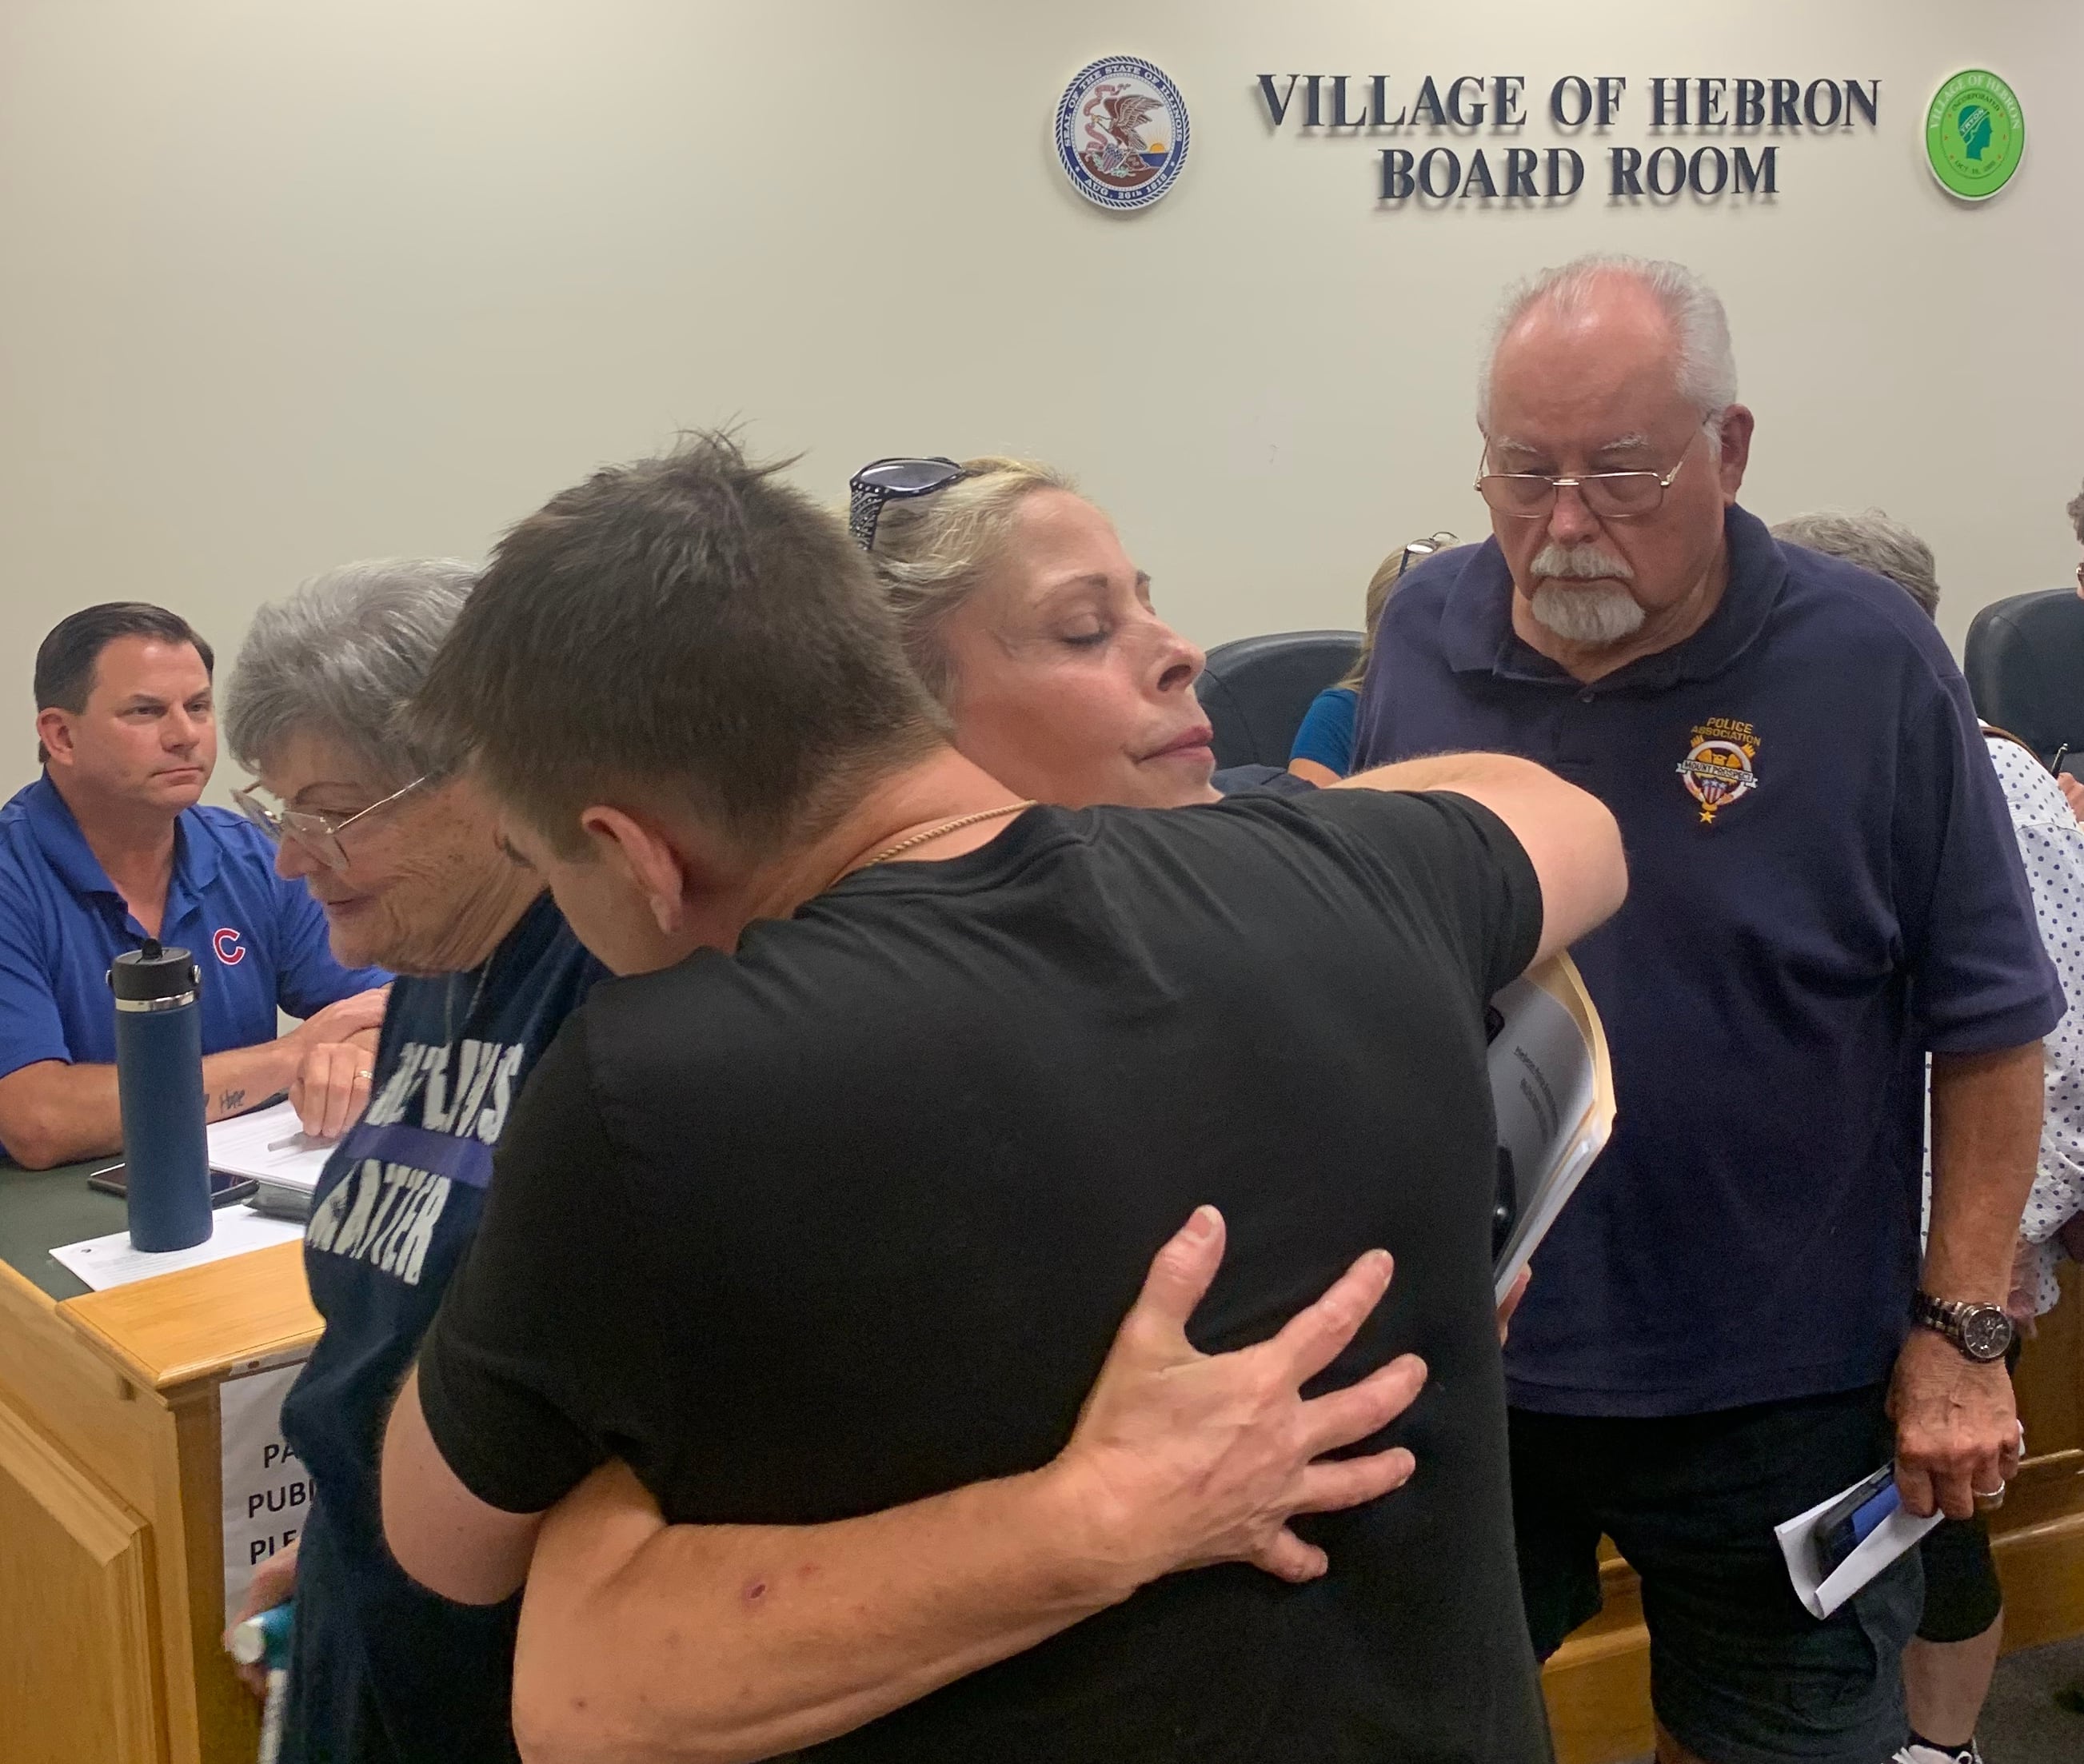 Since Hebron police chief ousted, another officer is gone and village seeks new public safety leader